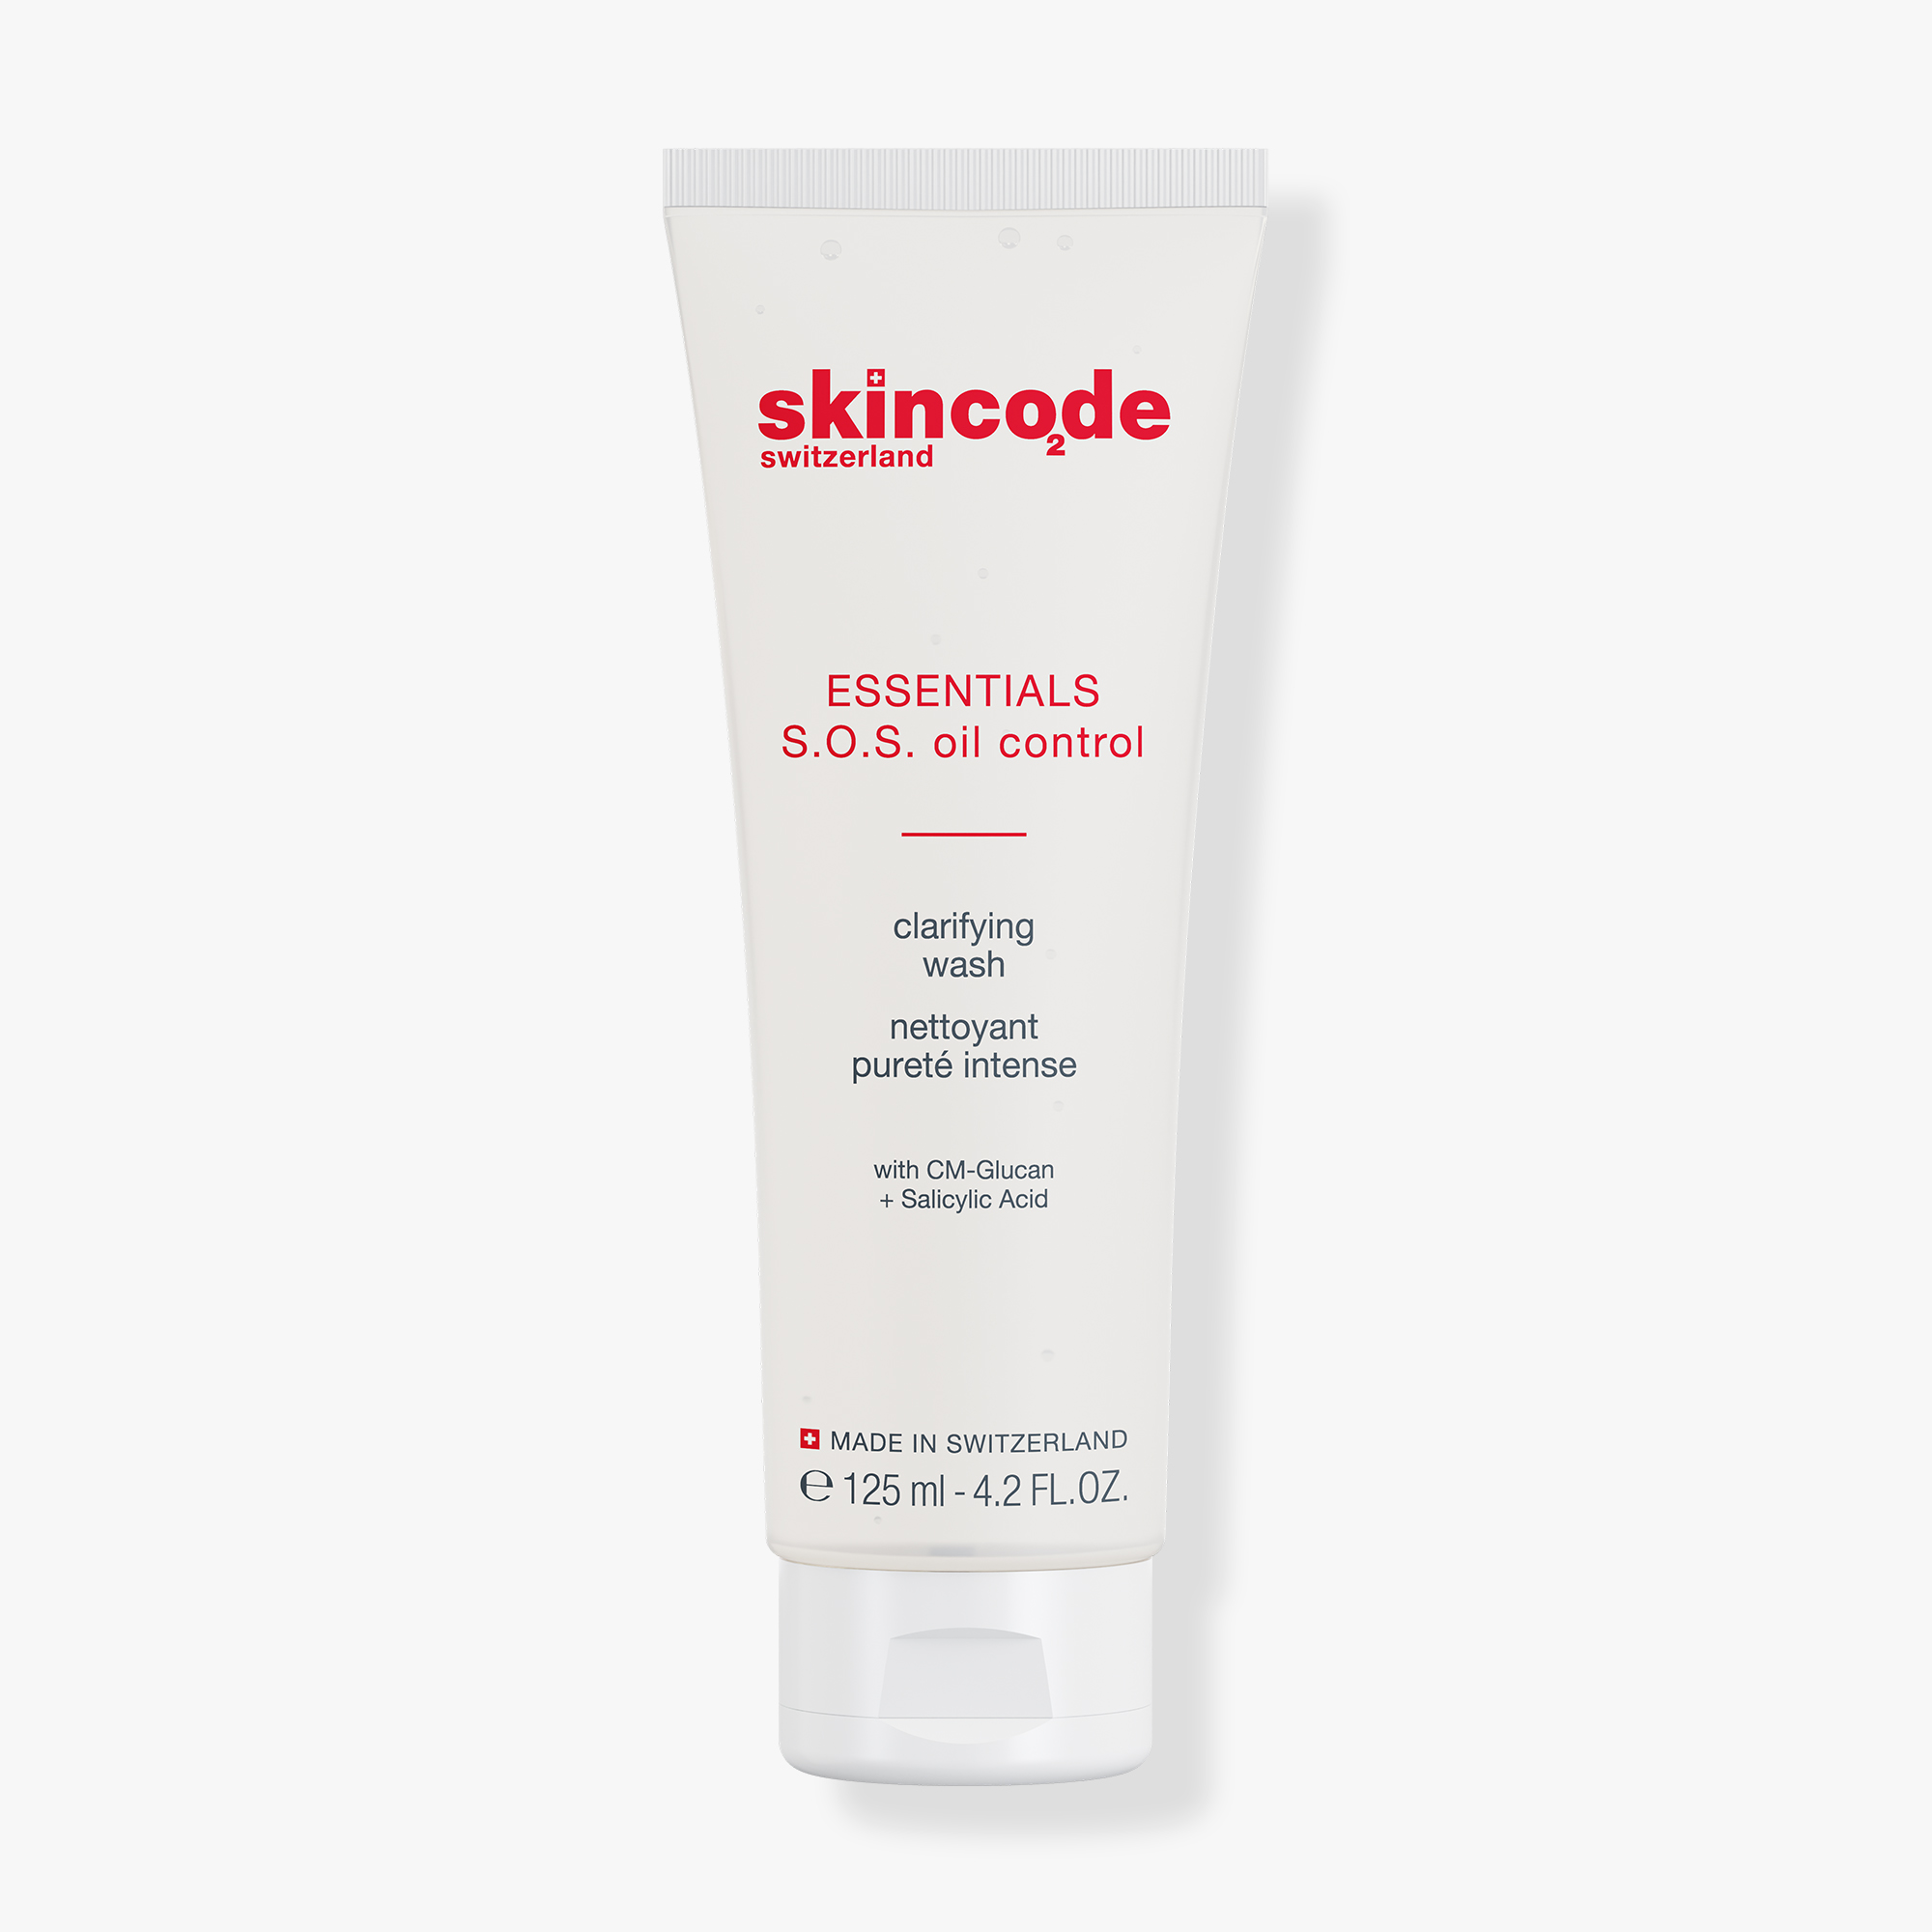 Skincode S.O.S. Oil Control Clarifying Face wash, 125ml